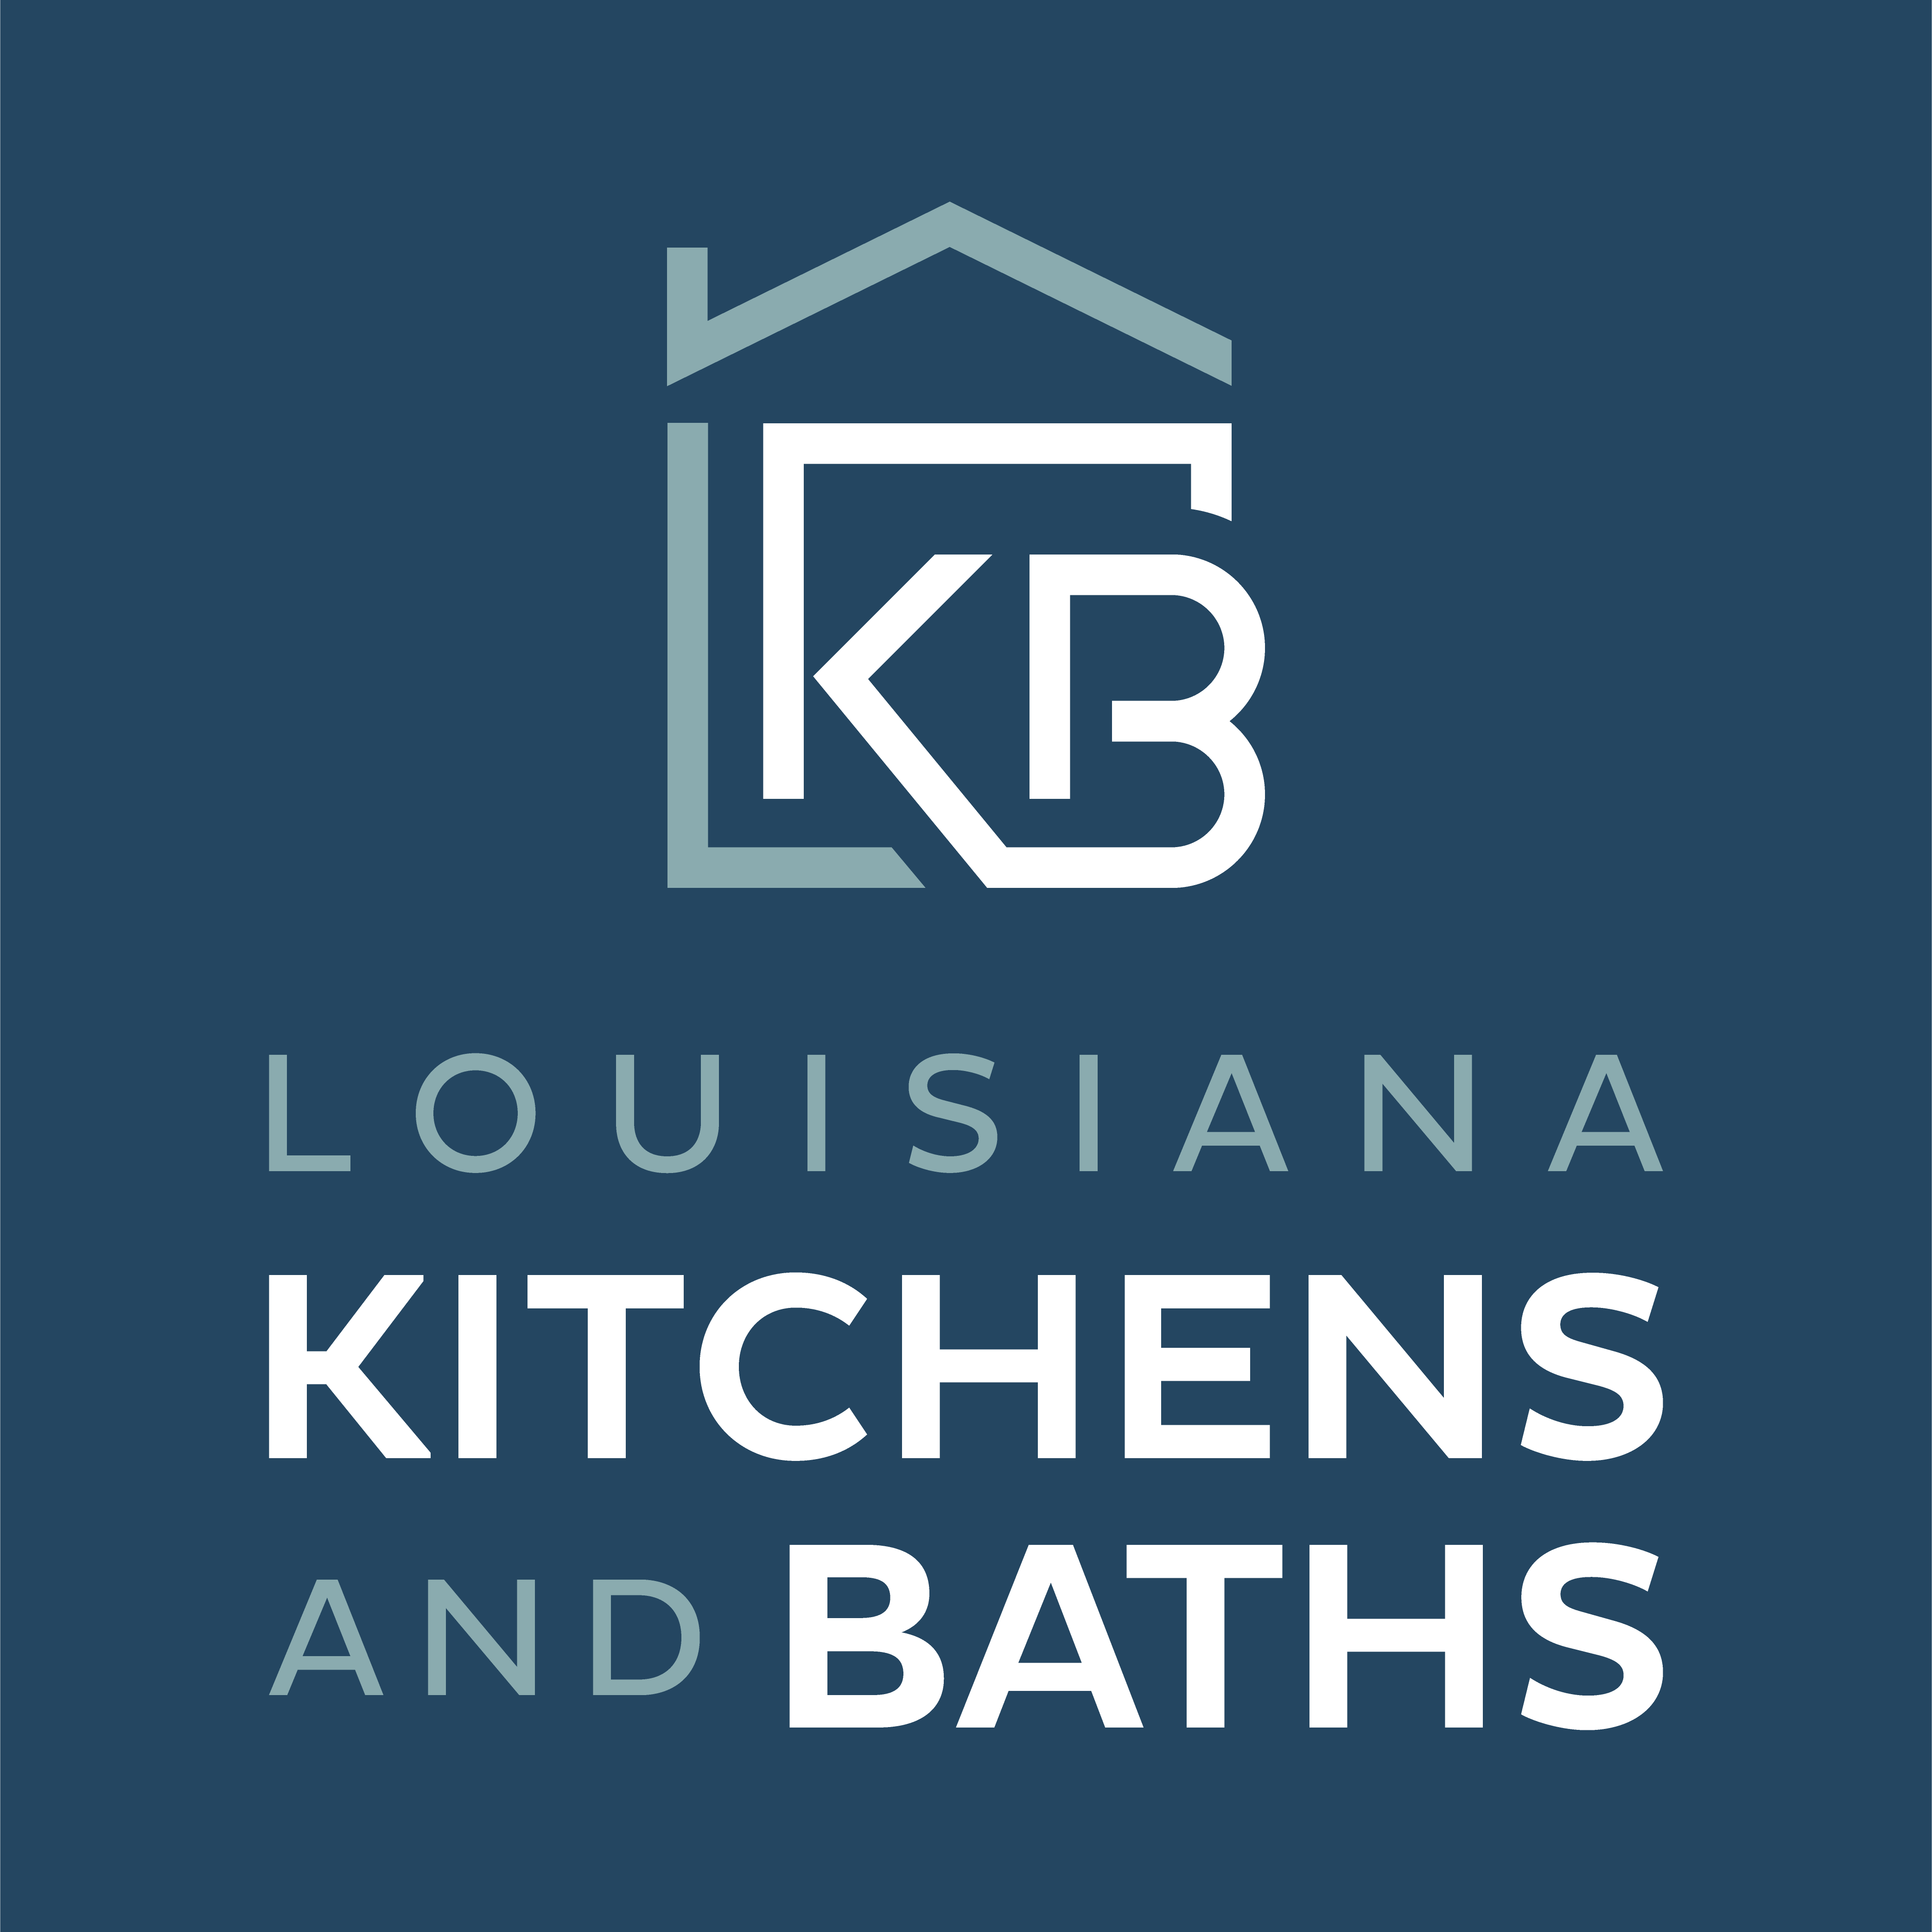 Louisiana Kitchens & Baths (negative) logo design by logo designer Freshwater Design for your inspiration and for the worlds largest logo competition